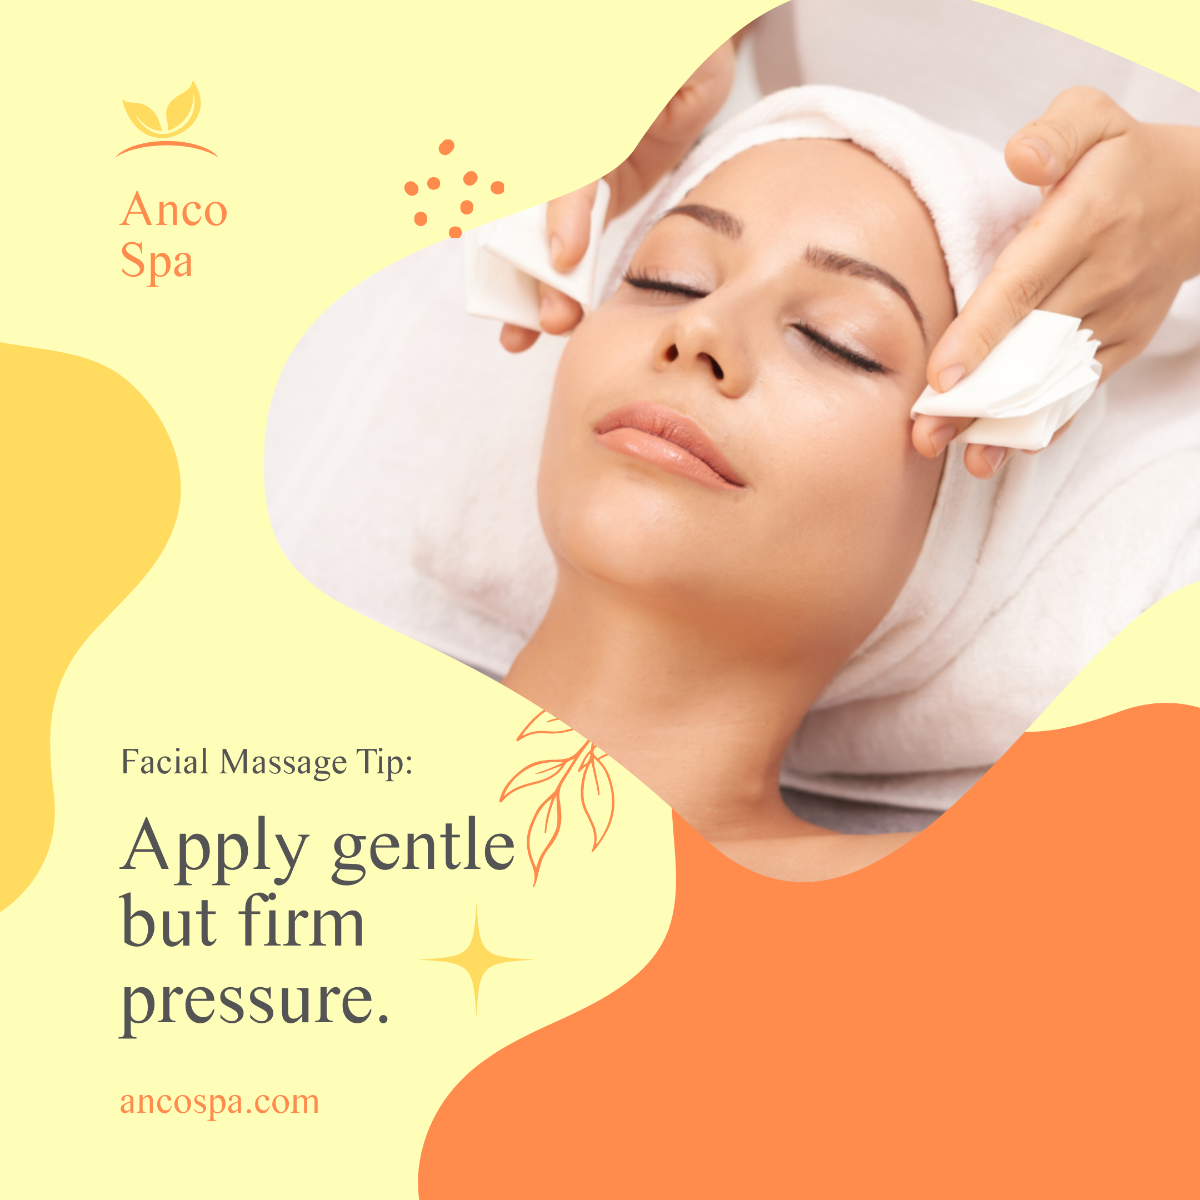 Facial Massage Tips And Tricks Post, Instagram, Facebook Template